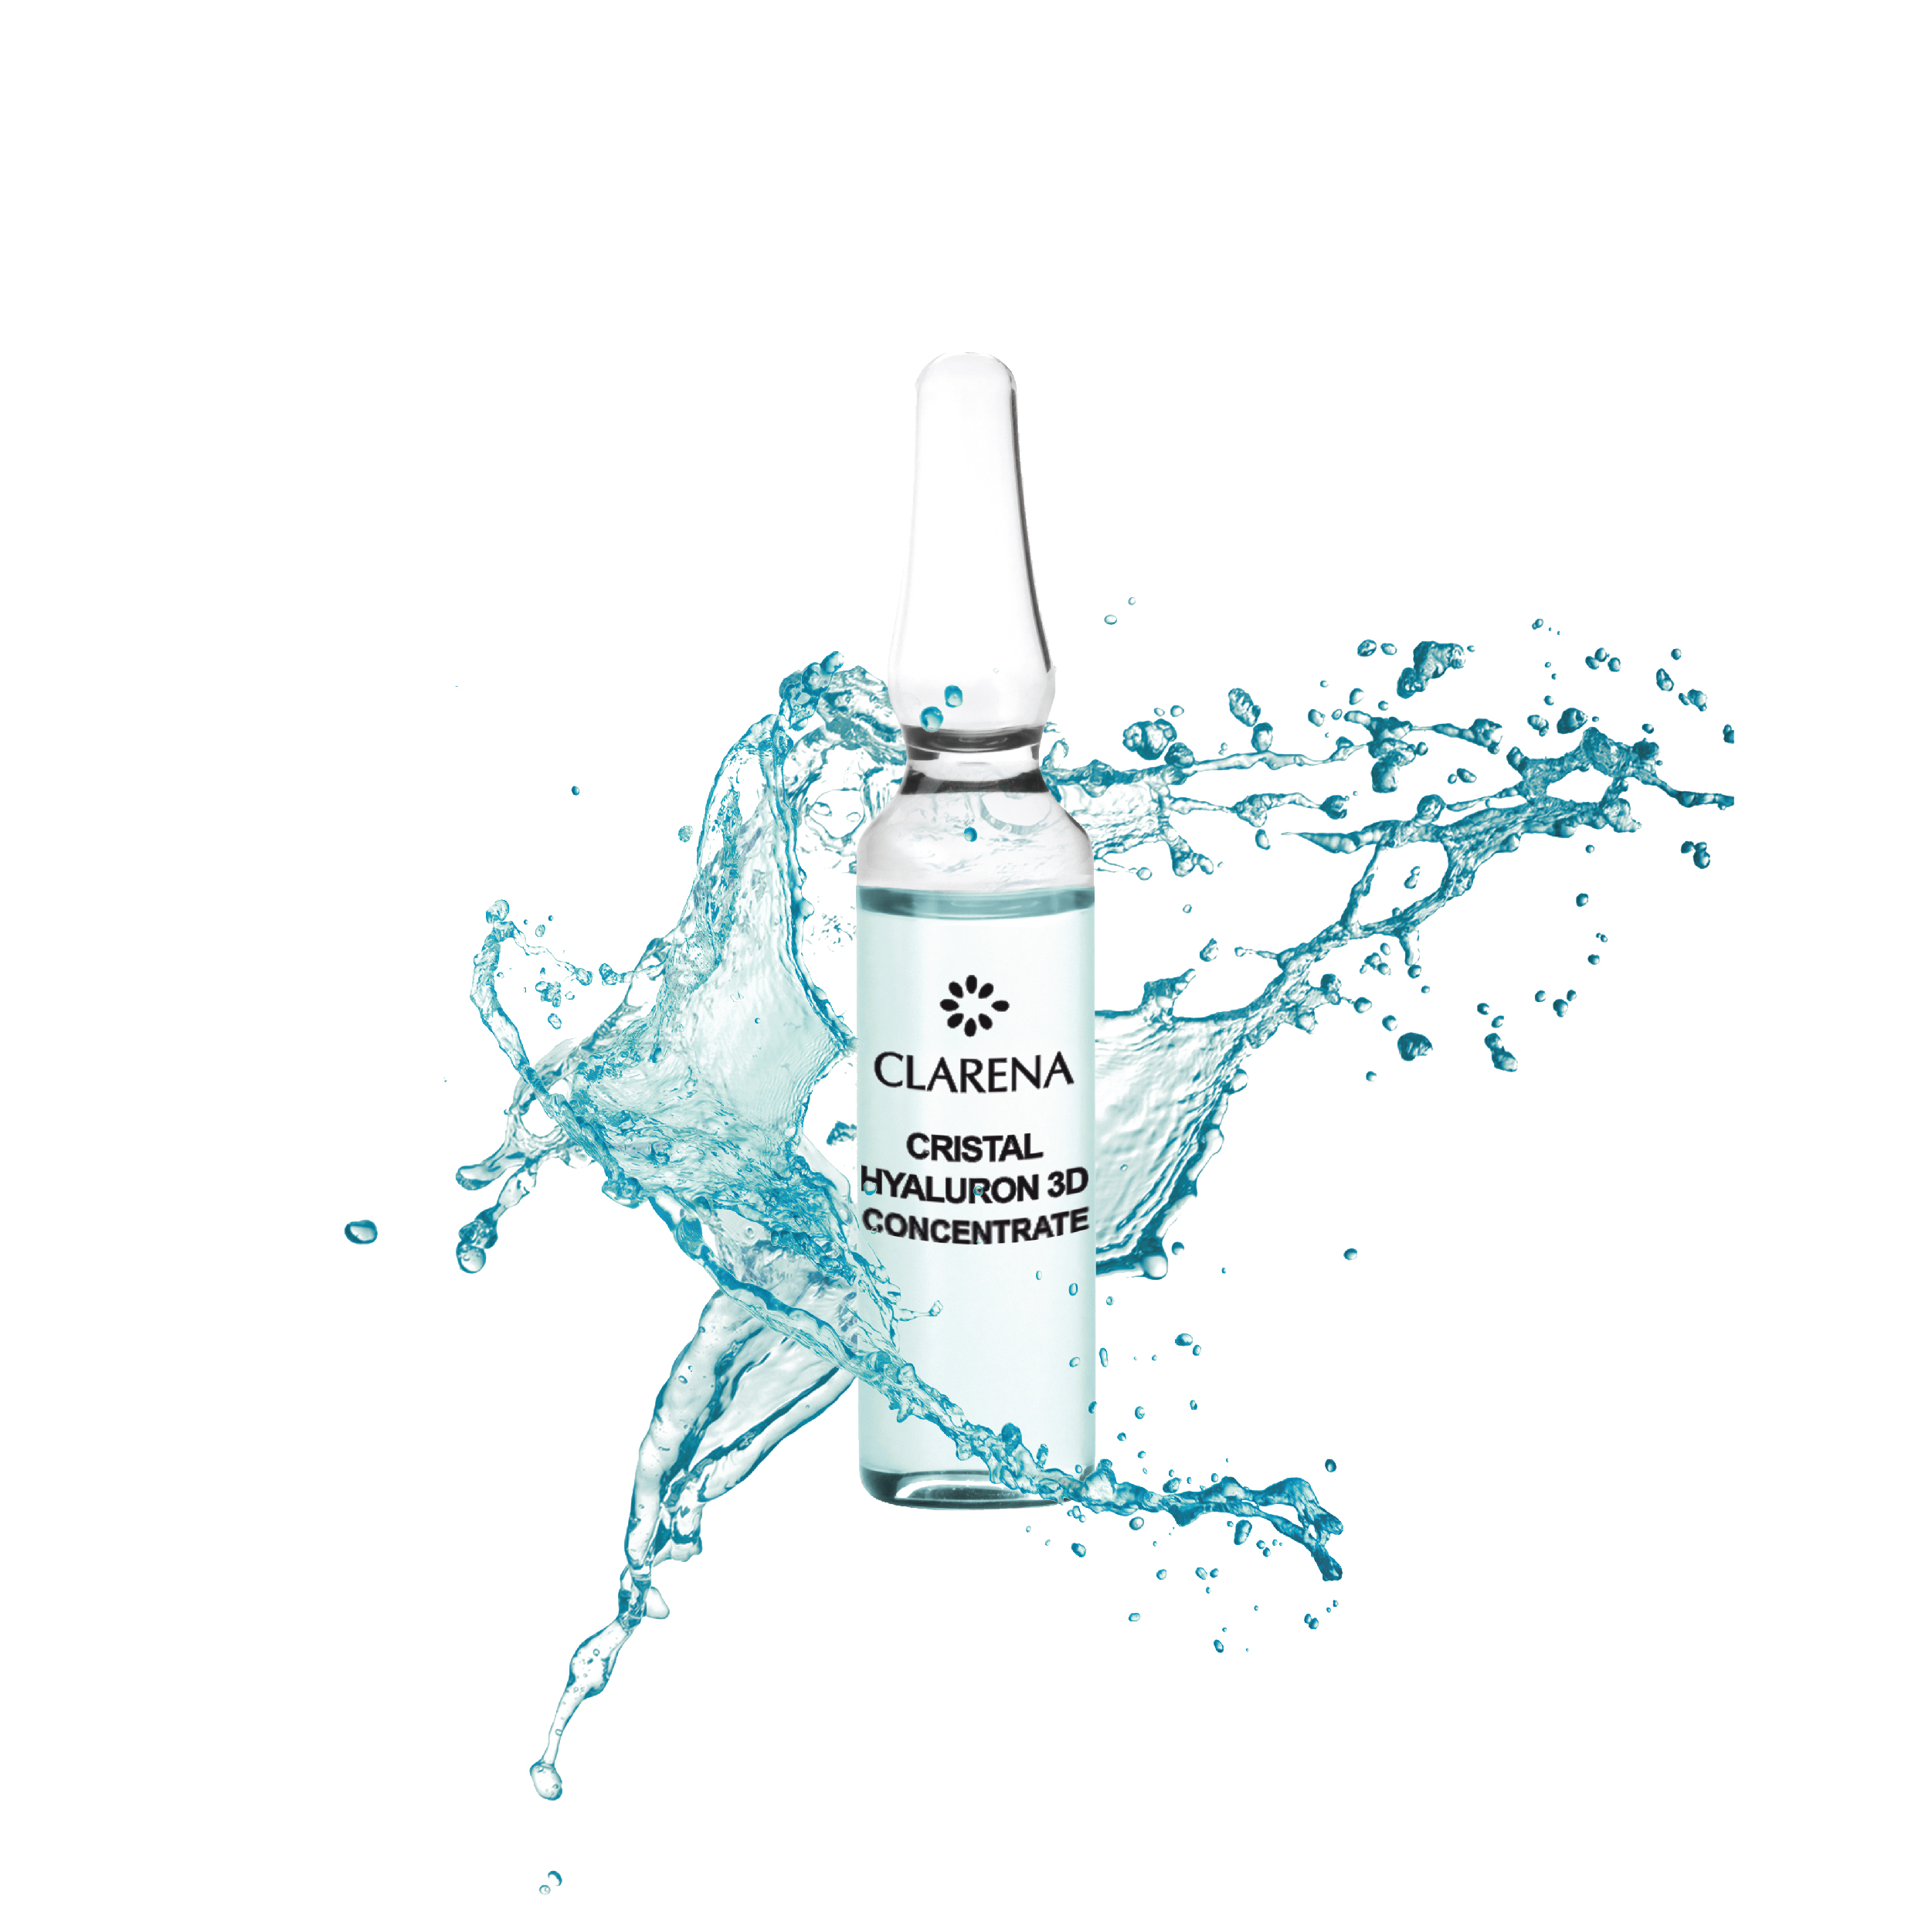 Cristal Hyaluron 3D Concentrate